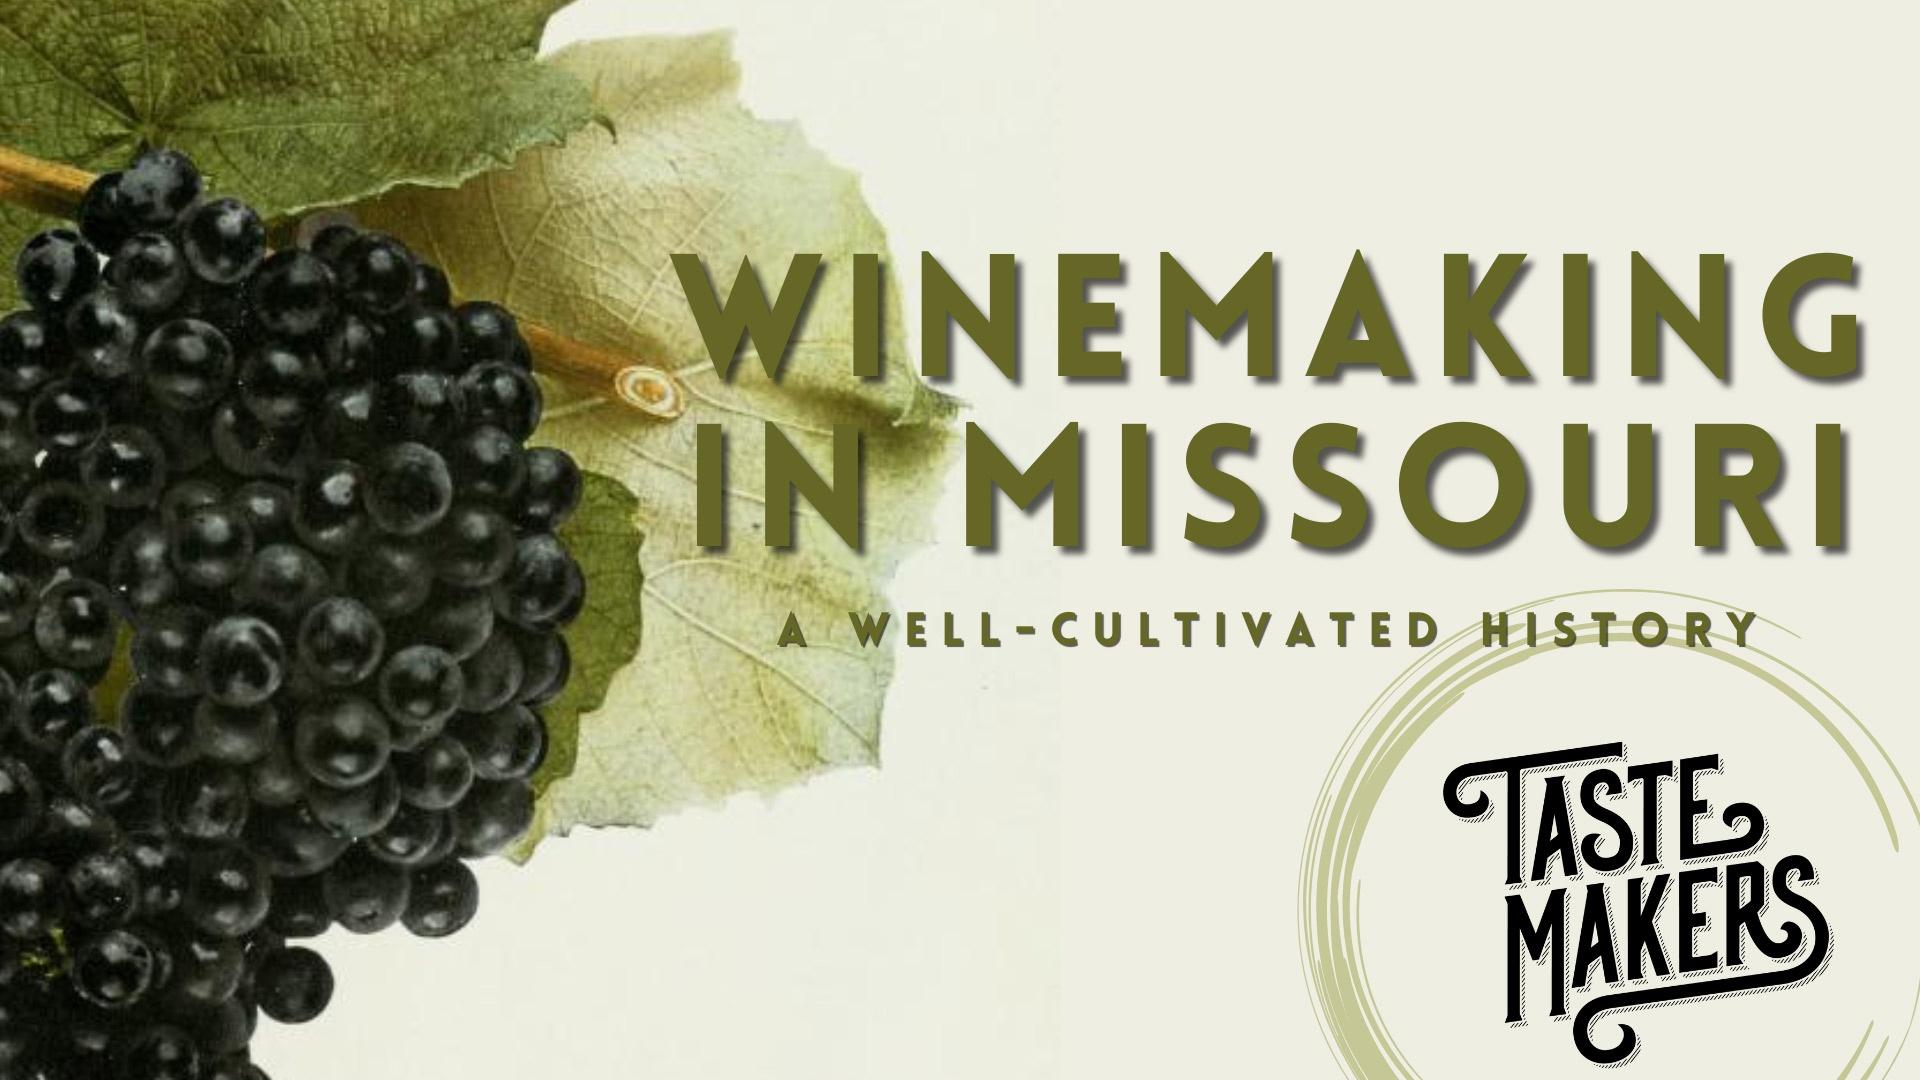 Winemaking in Missouri: A Well-Cultivated History